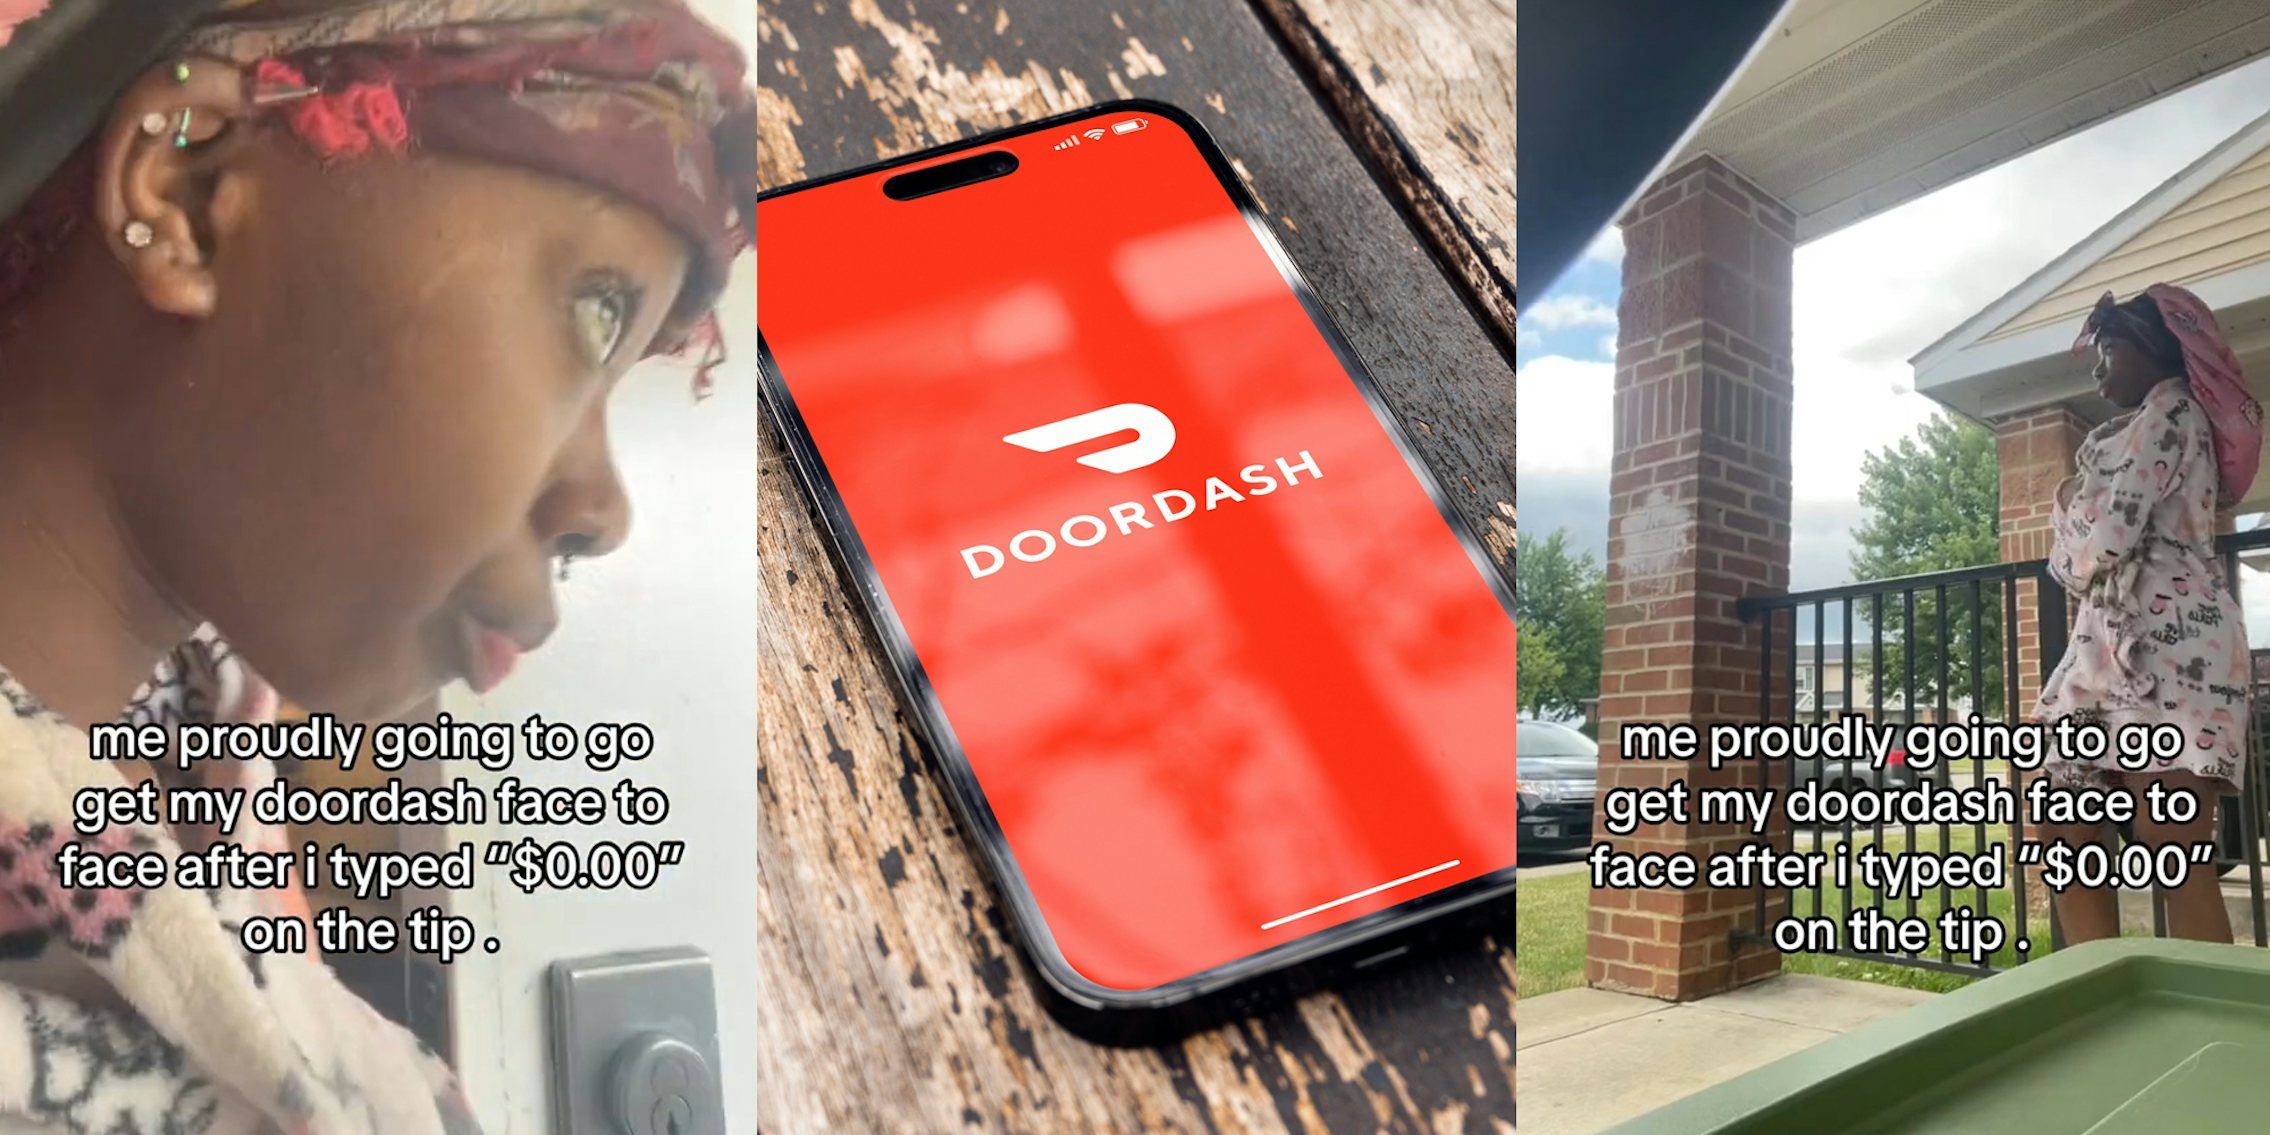 DoorDash customer opening door with caption 'me proudly going to go get my doordash face to face after i typed '$0.00' on the tip.' (l) DoorDash on phone on wooden surface (c) DoorDash customer standing outside with caption 'me proudly going to go get my doordash face to face after i typed '$0.00' on the tip.' (r)